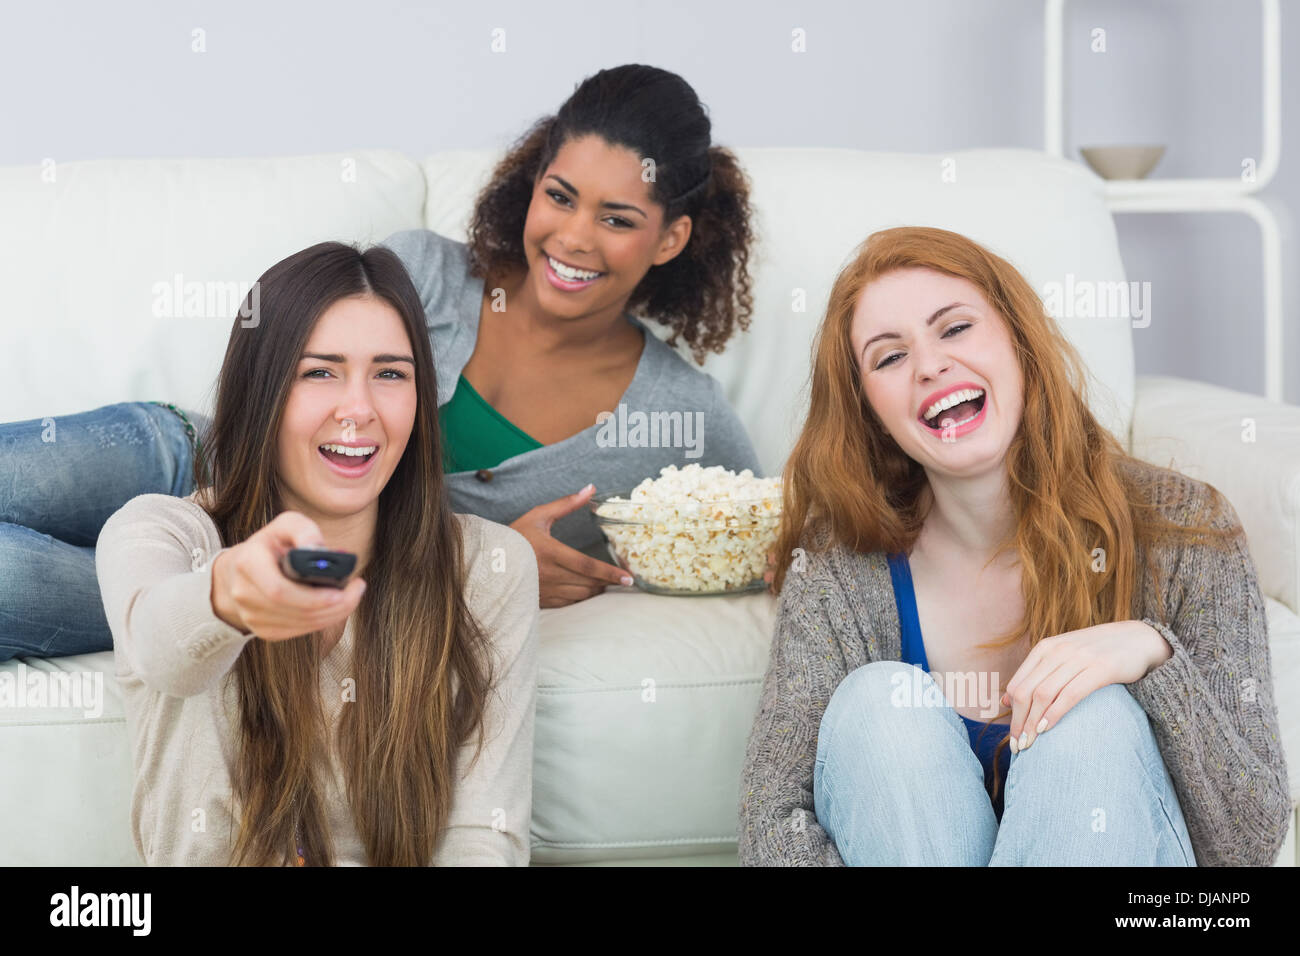 Cheerful friends with remote control and popcorn bowl at home Stock Photo